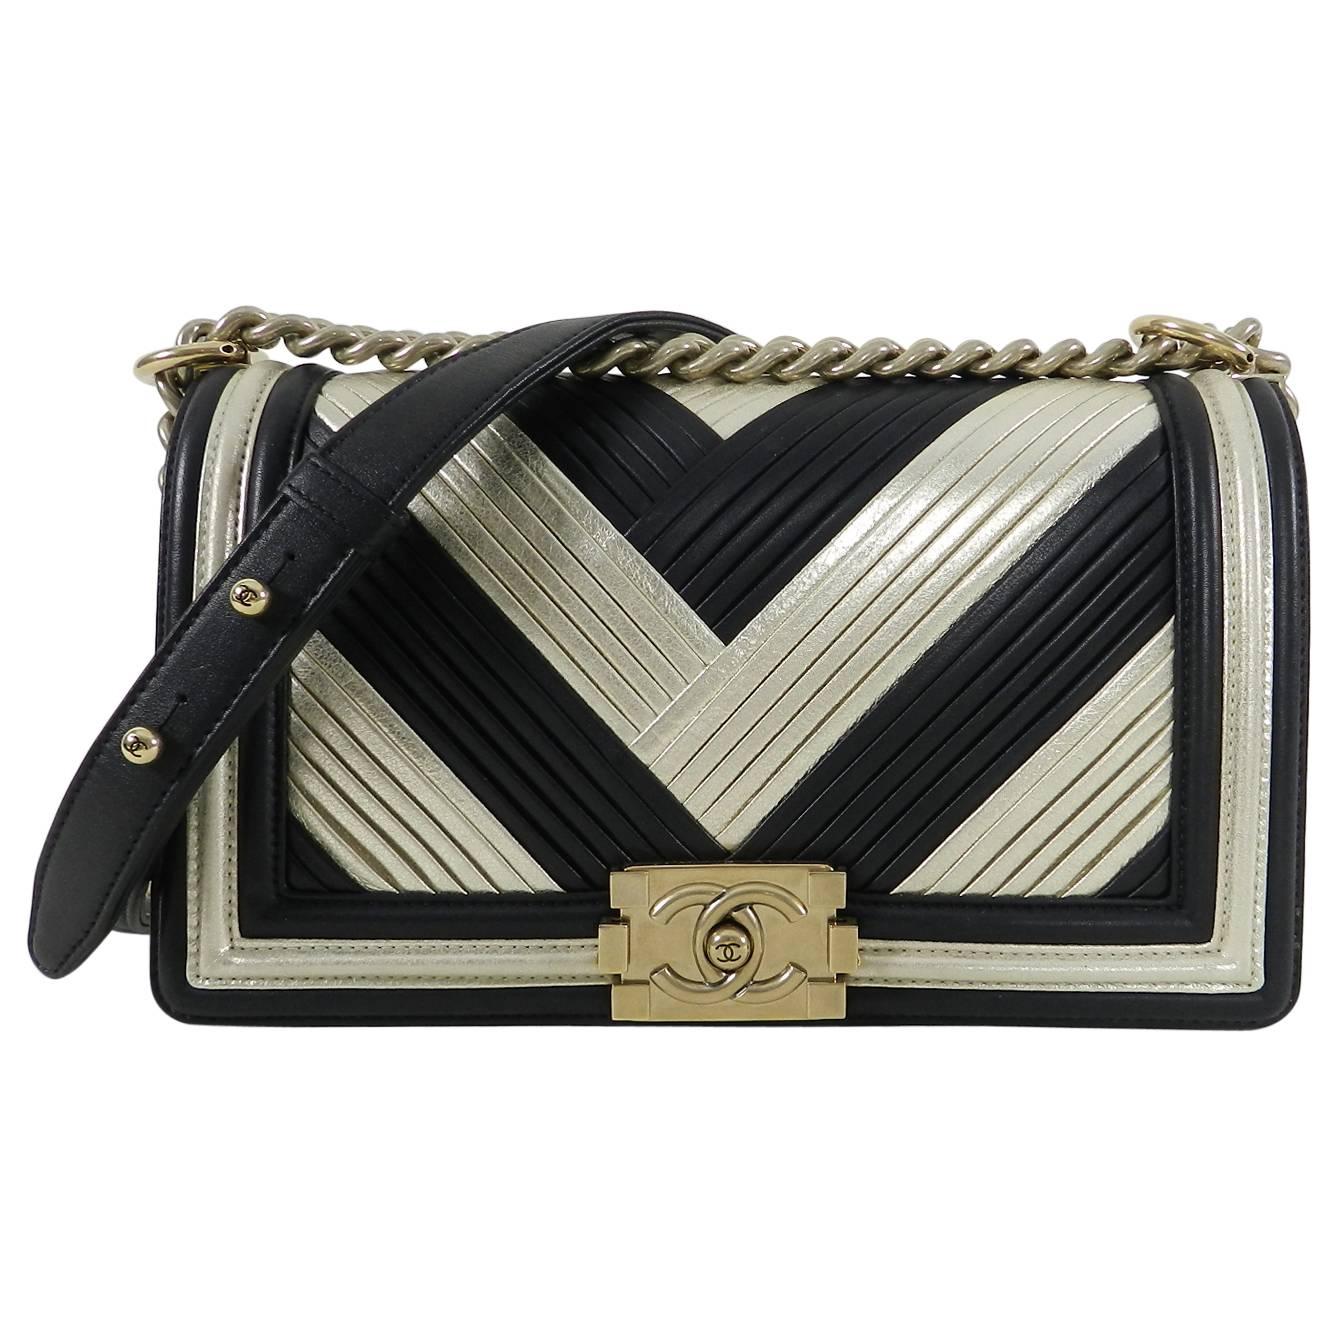 Chanel 16A Le Boy in Rome Medium Black and Gold Chevron Bag.  Limited edition hard to find bag. This medium size bag measures 10”x 6”x 3.25”. Single chain drop 20.5”, double chain drop 11.5”. Excellent pre-owned condition - carried only a few times